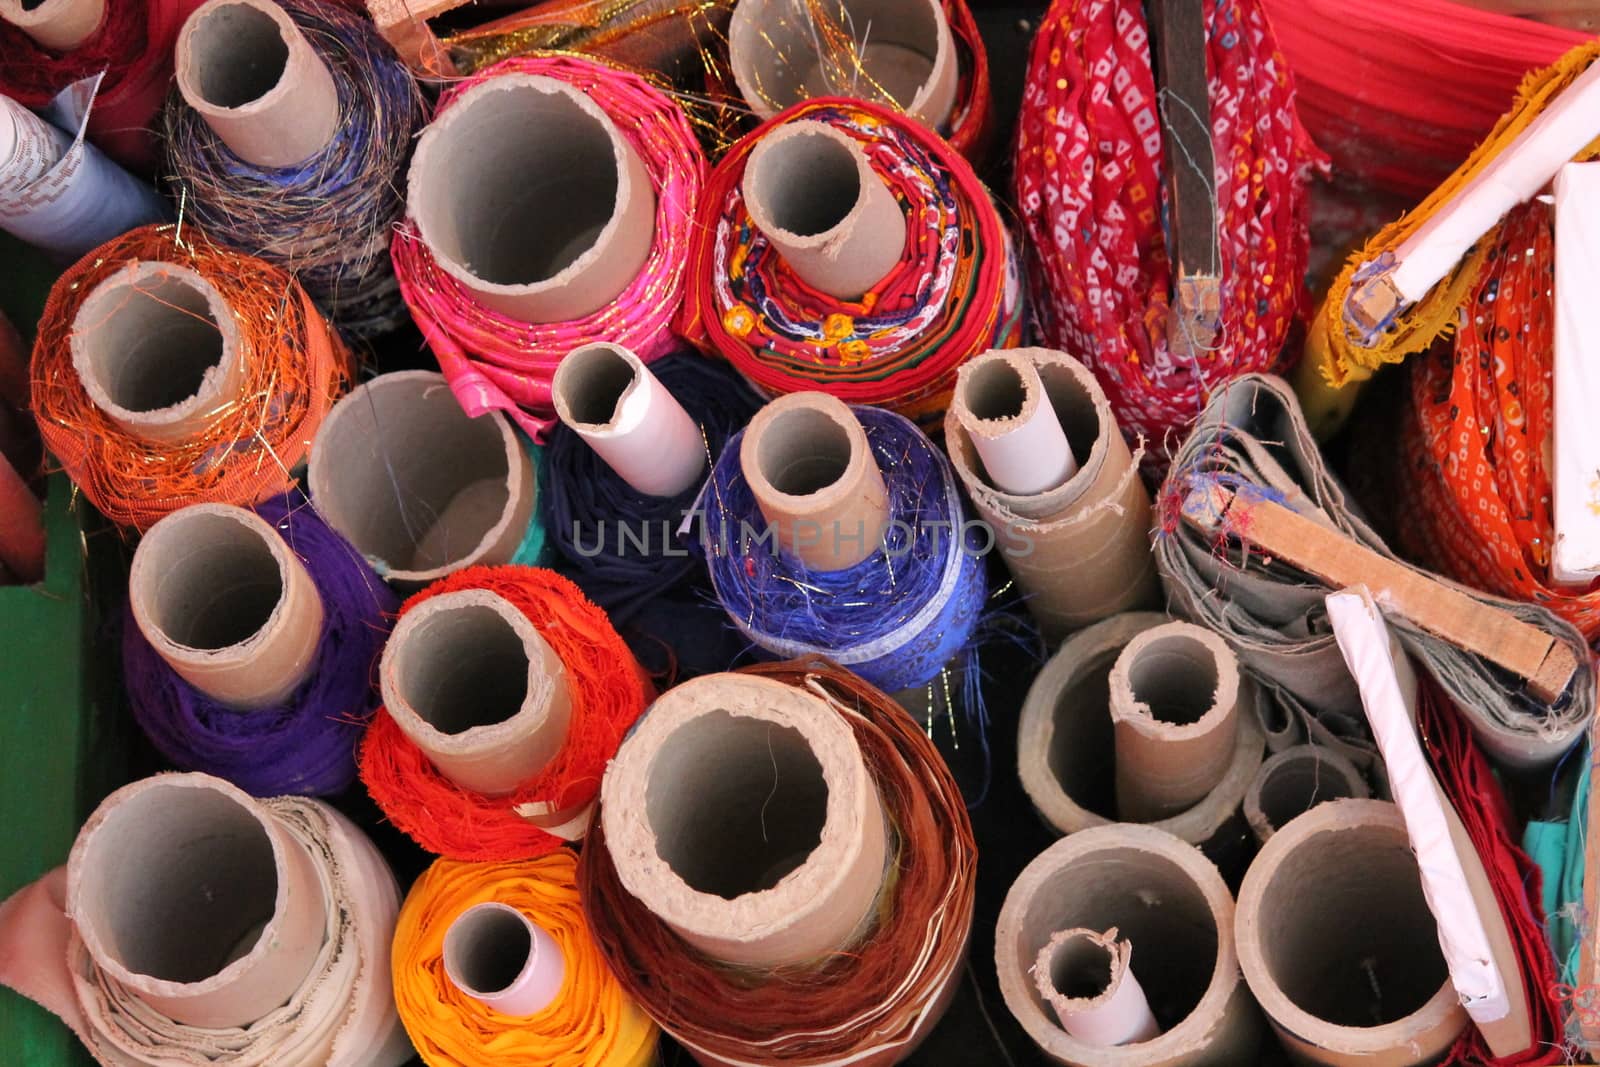 haberdashery shop choice of fabric material at fabric market  by cheekylorns